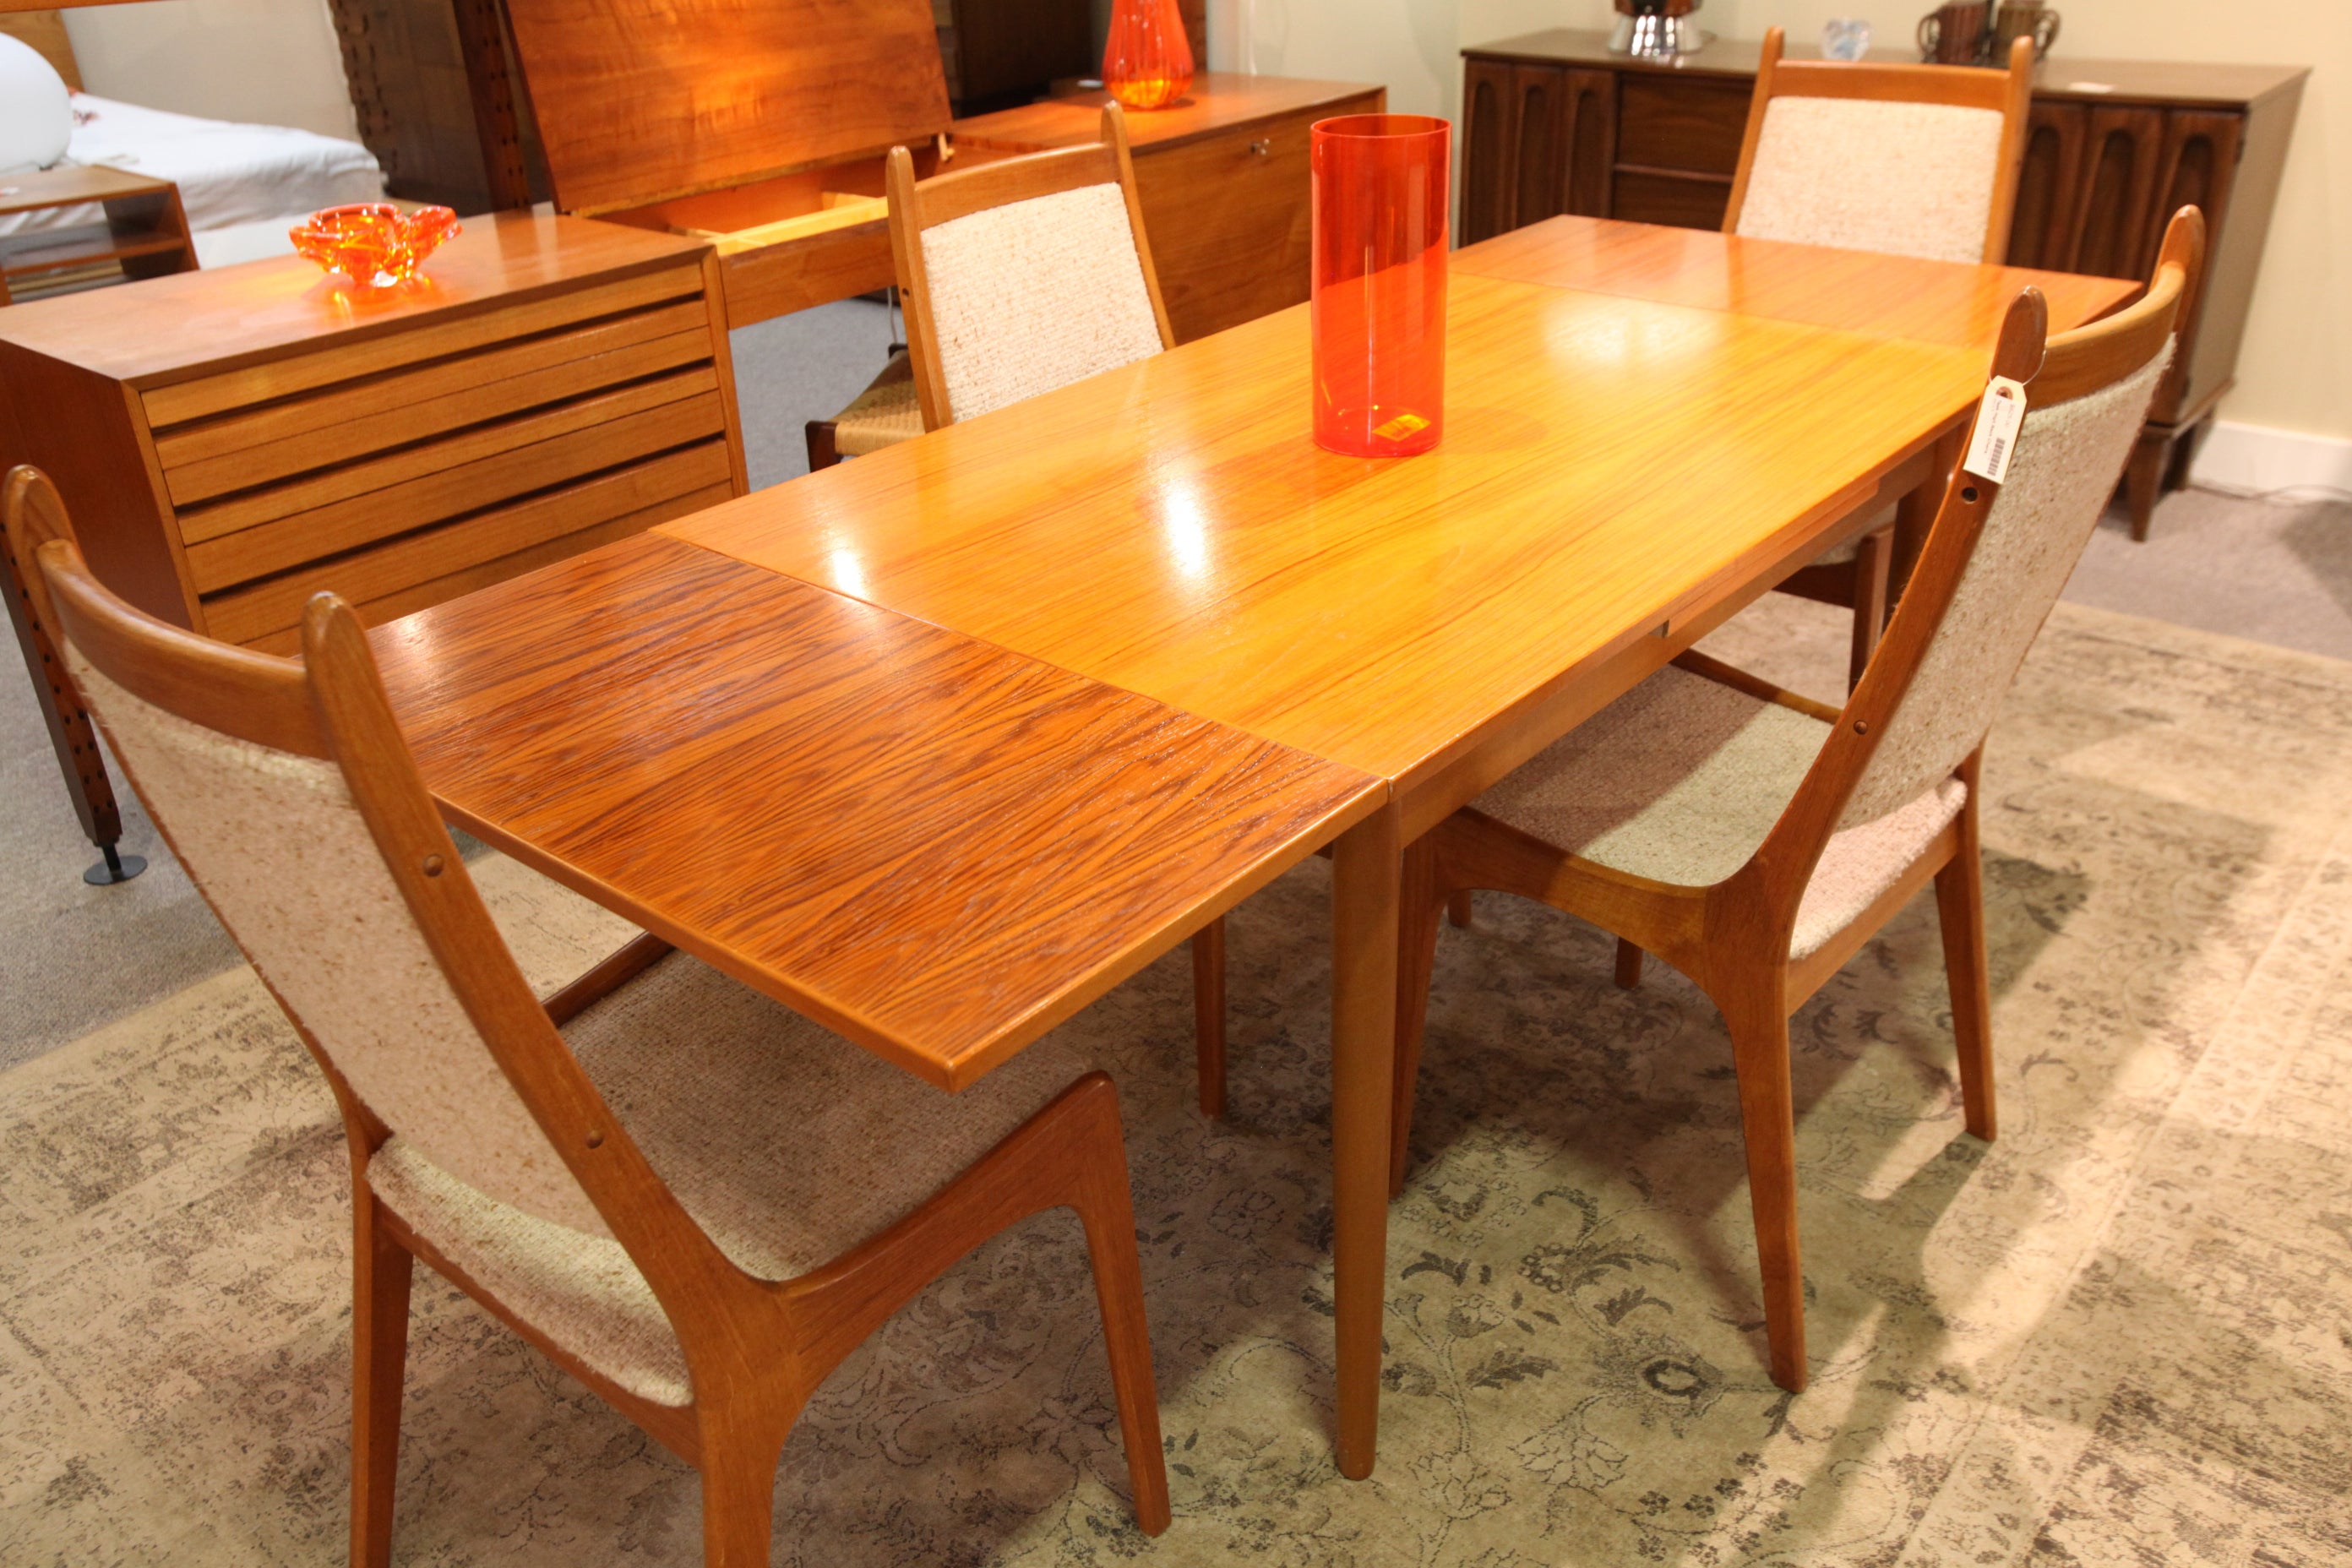 Danish Teak Extension Table by FARSTRUP (79" x 32") or (48" x 32")